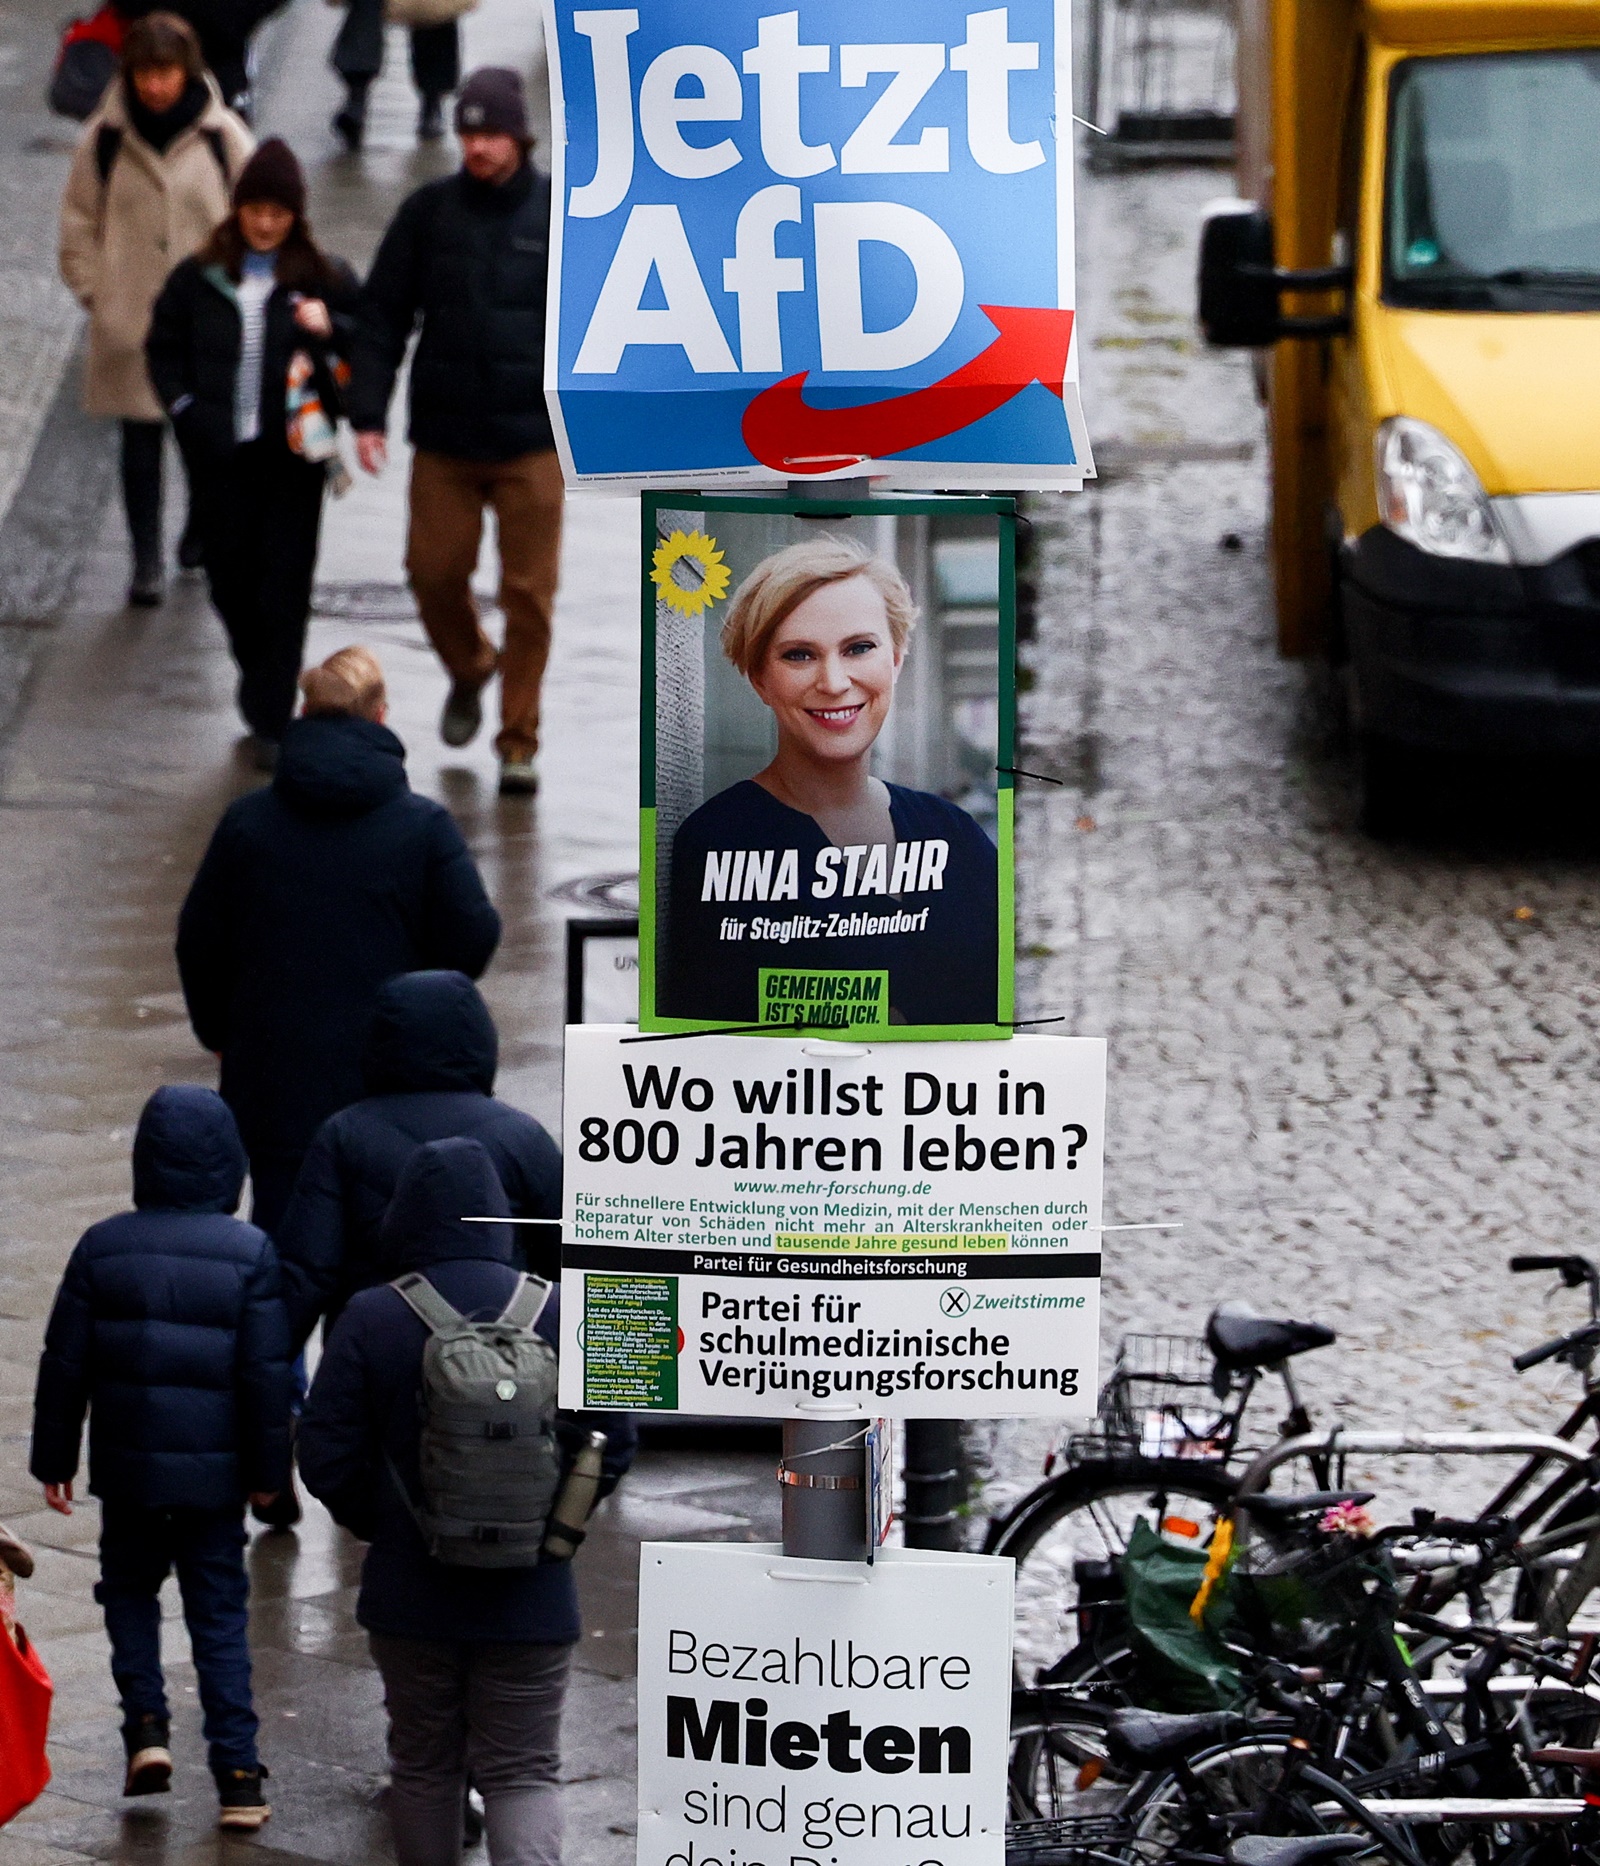 epa11058961 A campaign poster of the right-wing Alternative for Germany (Alternative fuer Deutschland, AfD) party, reading 'Now AfD!', hangs next to a campaign poster of the Green party Alliance 90 / The Greens (Buendnis 90/ Die Gruenen) on a lamp post in Steglitz district in Berlin, Germany, 05 January 2024. On 19 December 2023, the German Federal Constitutional Court ruled that the election to the 20th German Bundestag must be repeated in 455 Berlin constituencies. The date for the partial election rerun is 11 February 2024.  EPA/FILIP SINGER